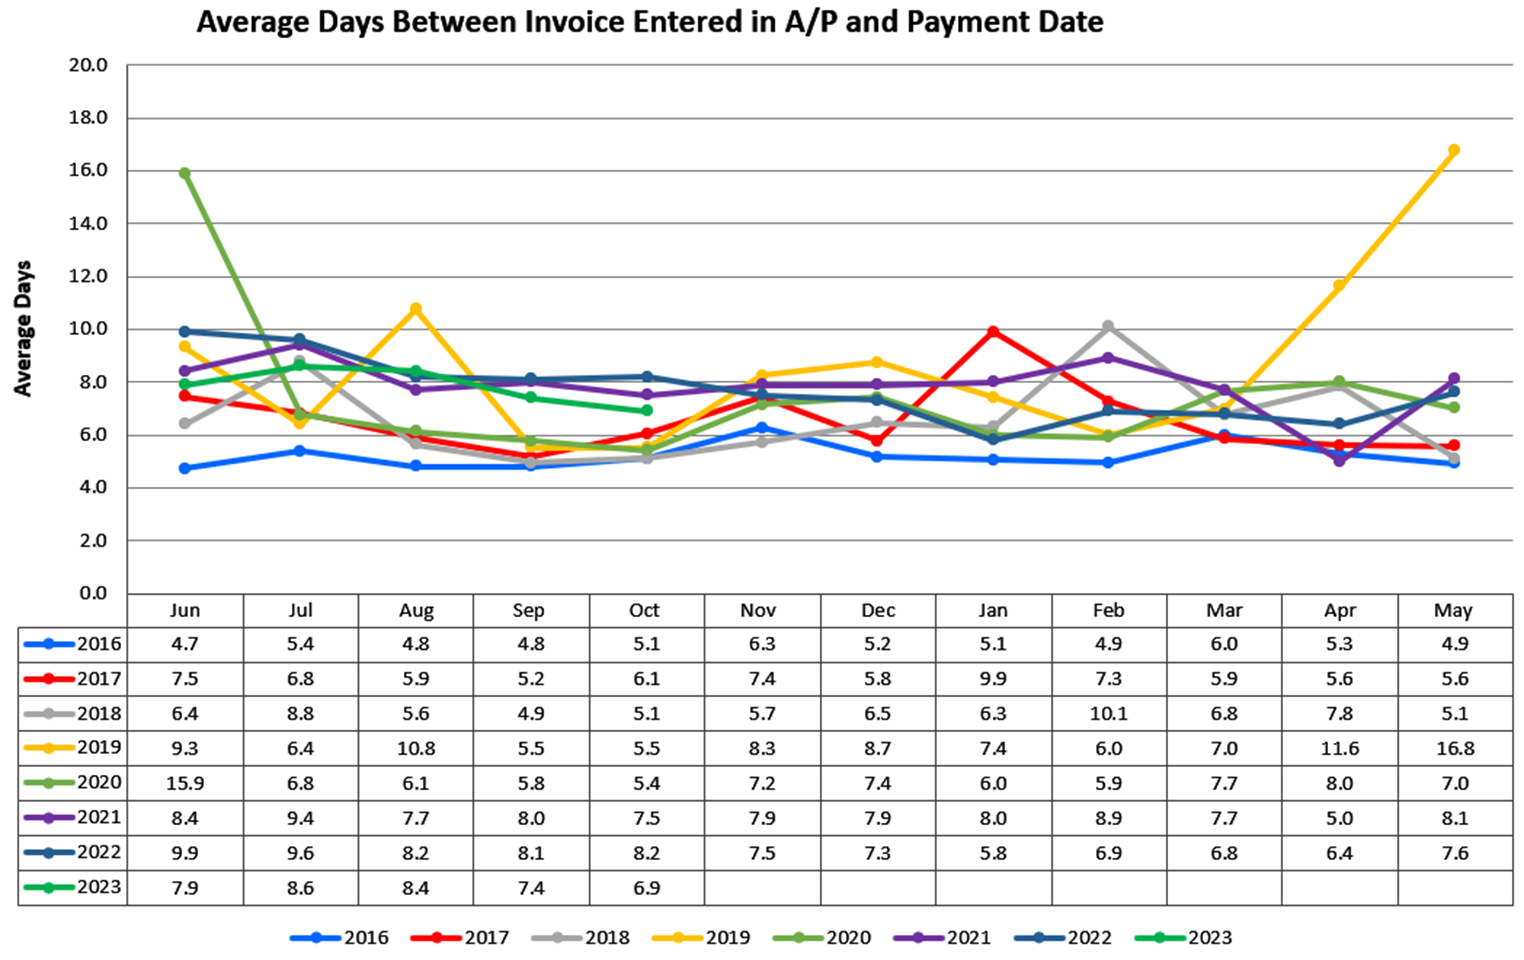 Average Days Between Invoice Entered in A/P and Payment Date